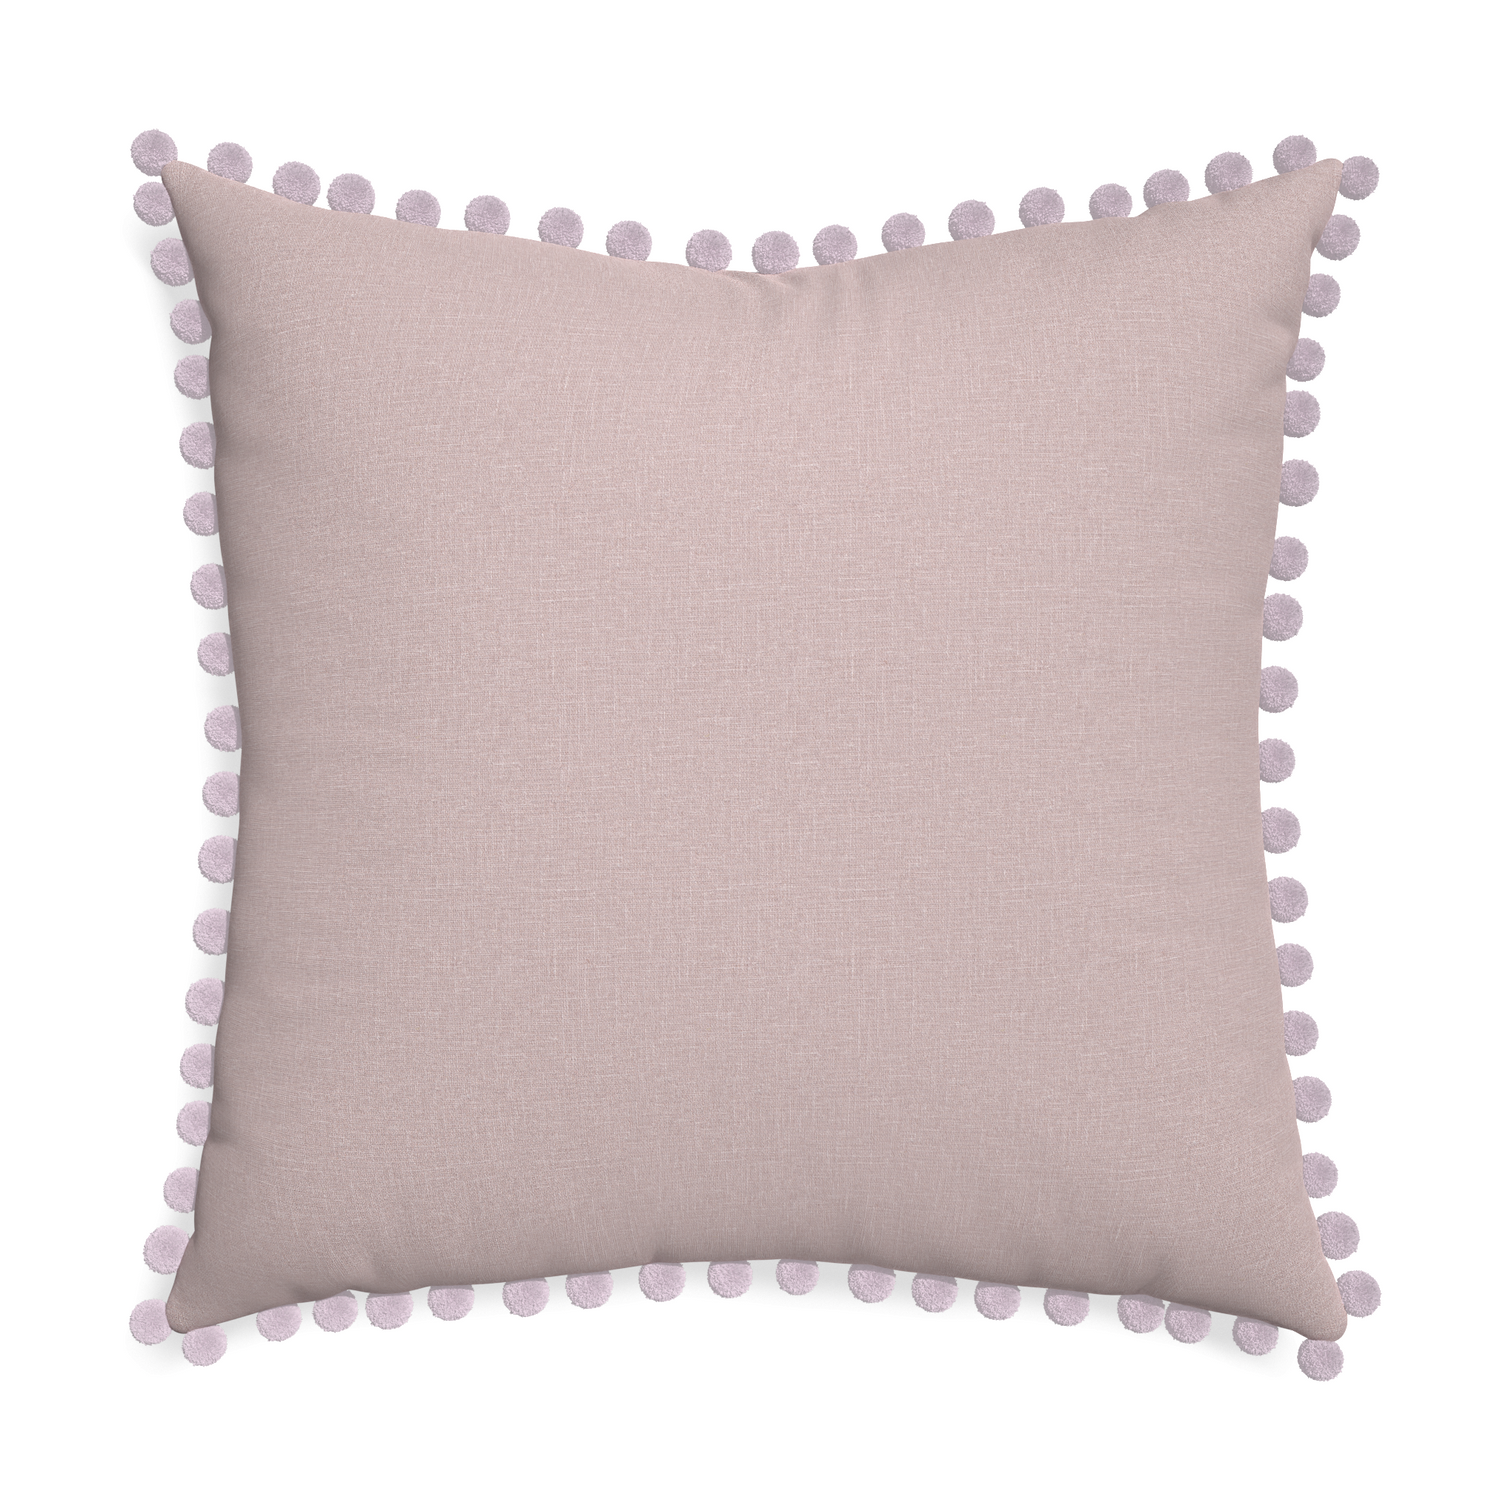 Euro-sham orchid custom mauve pinkpillow with l on white background